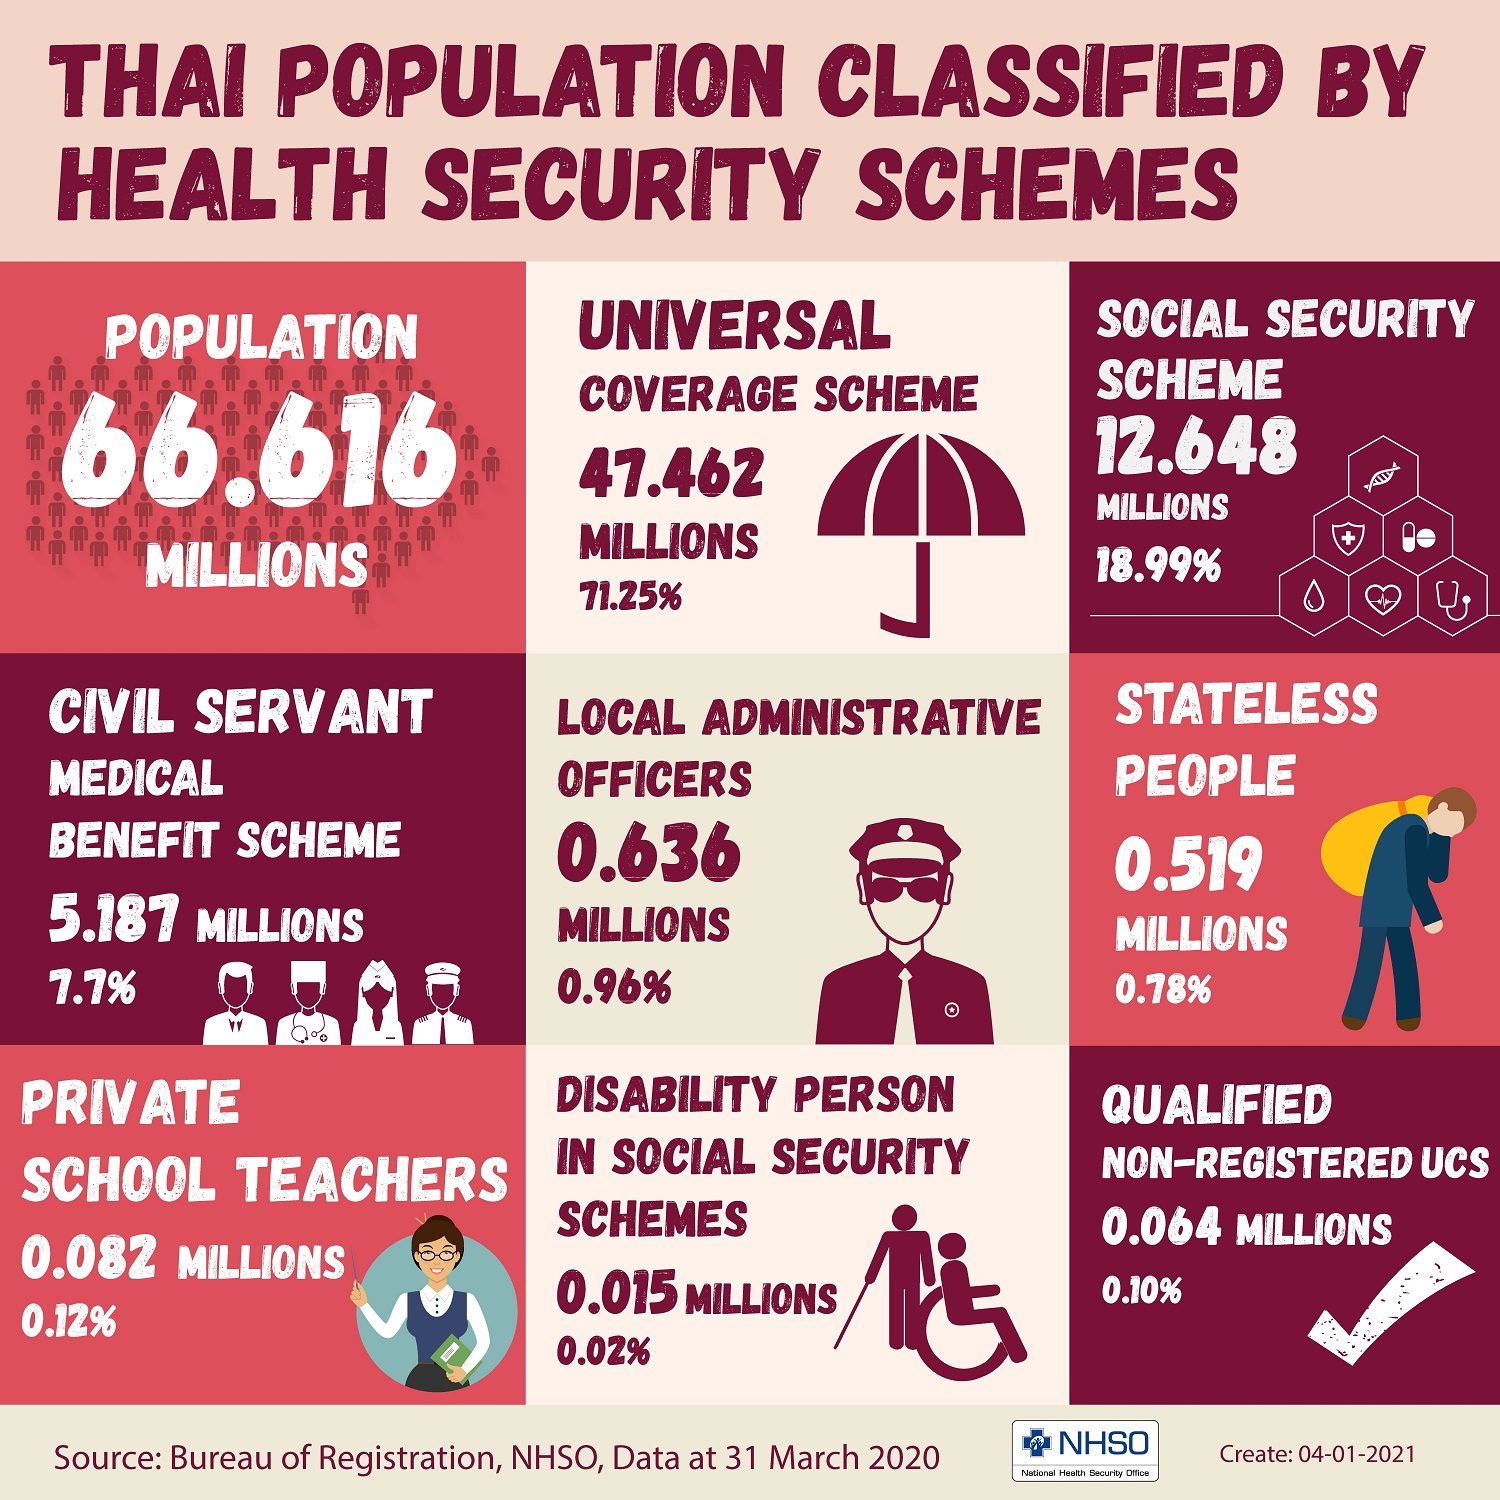 Thai Population Classified by Health Security Schemes